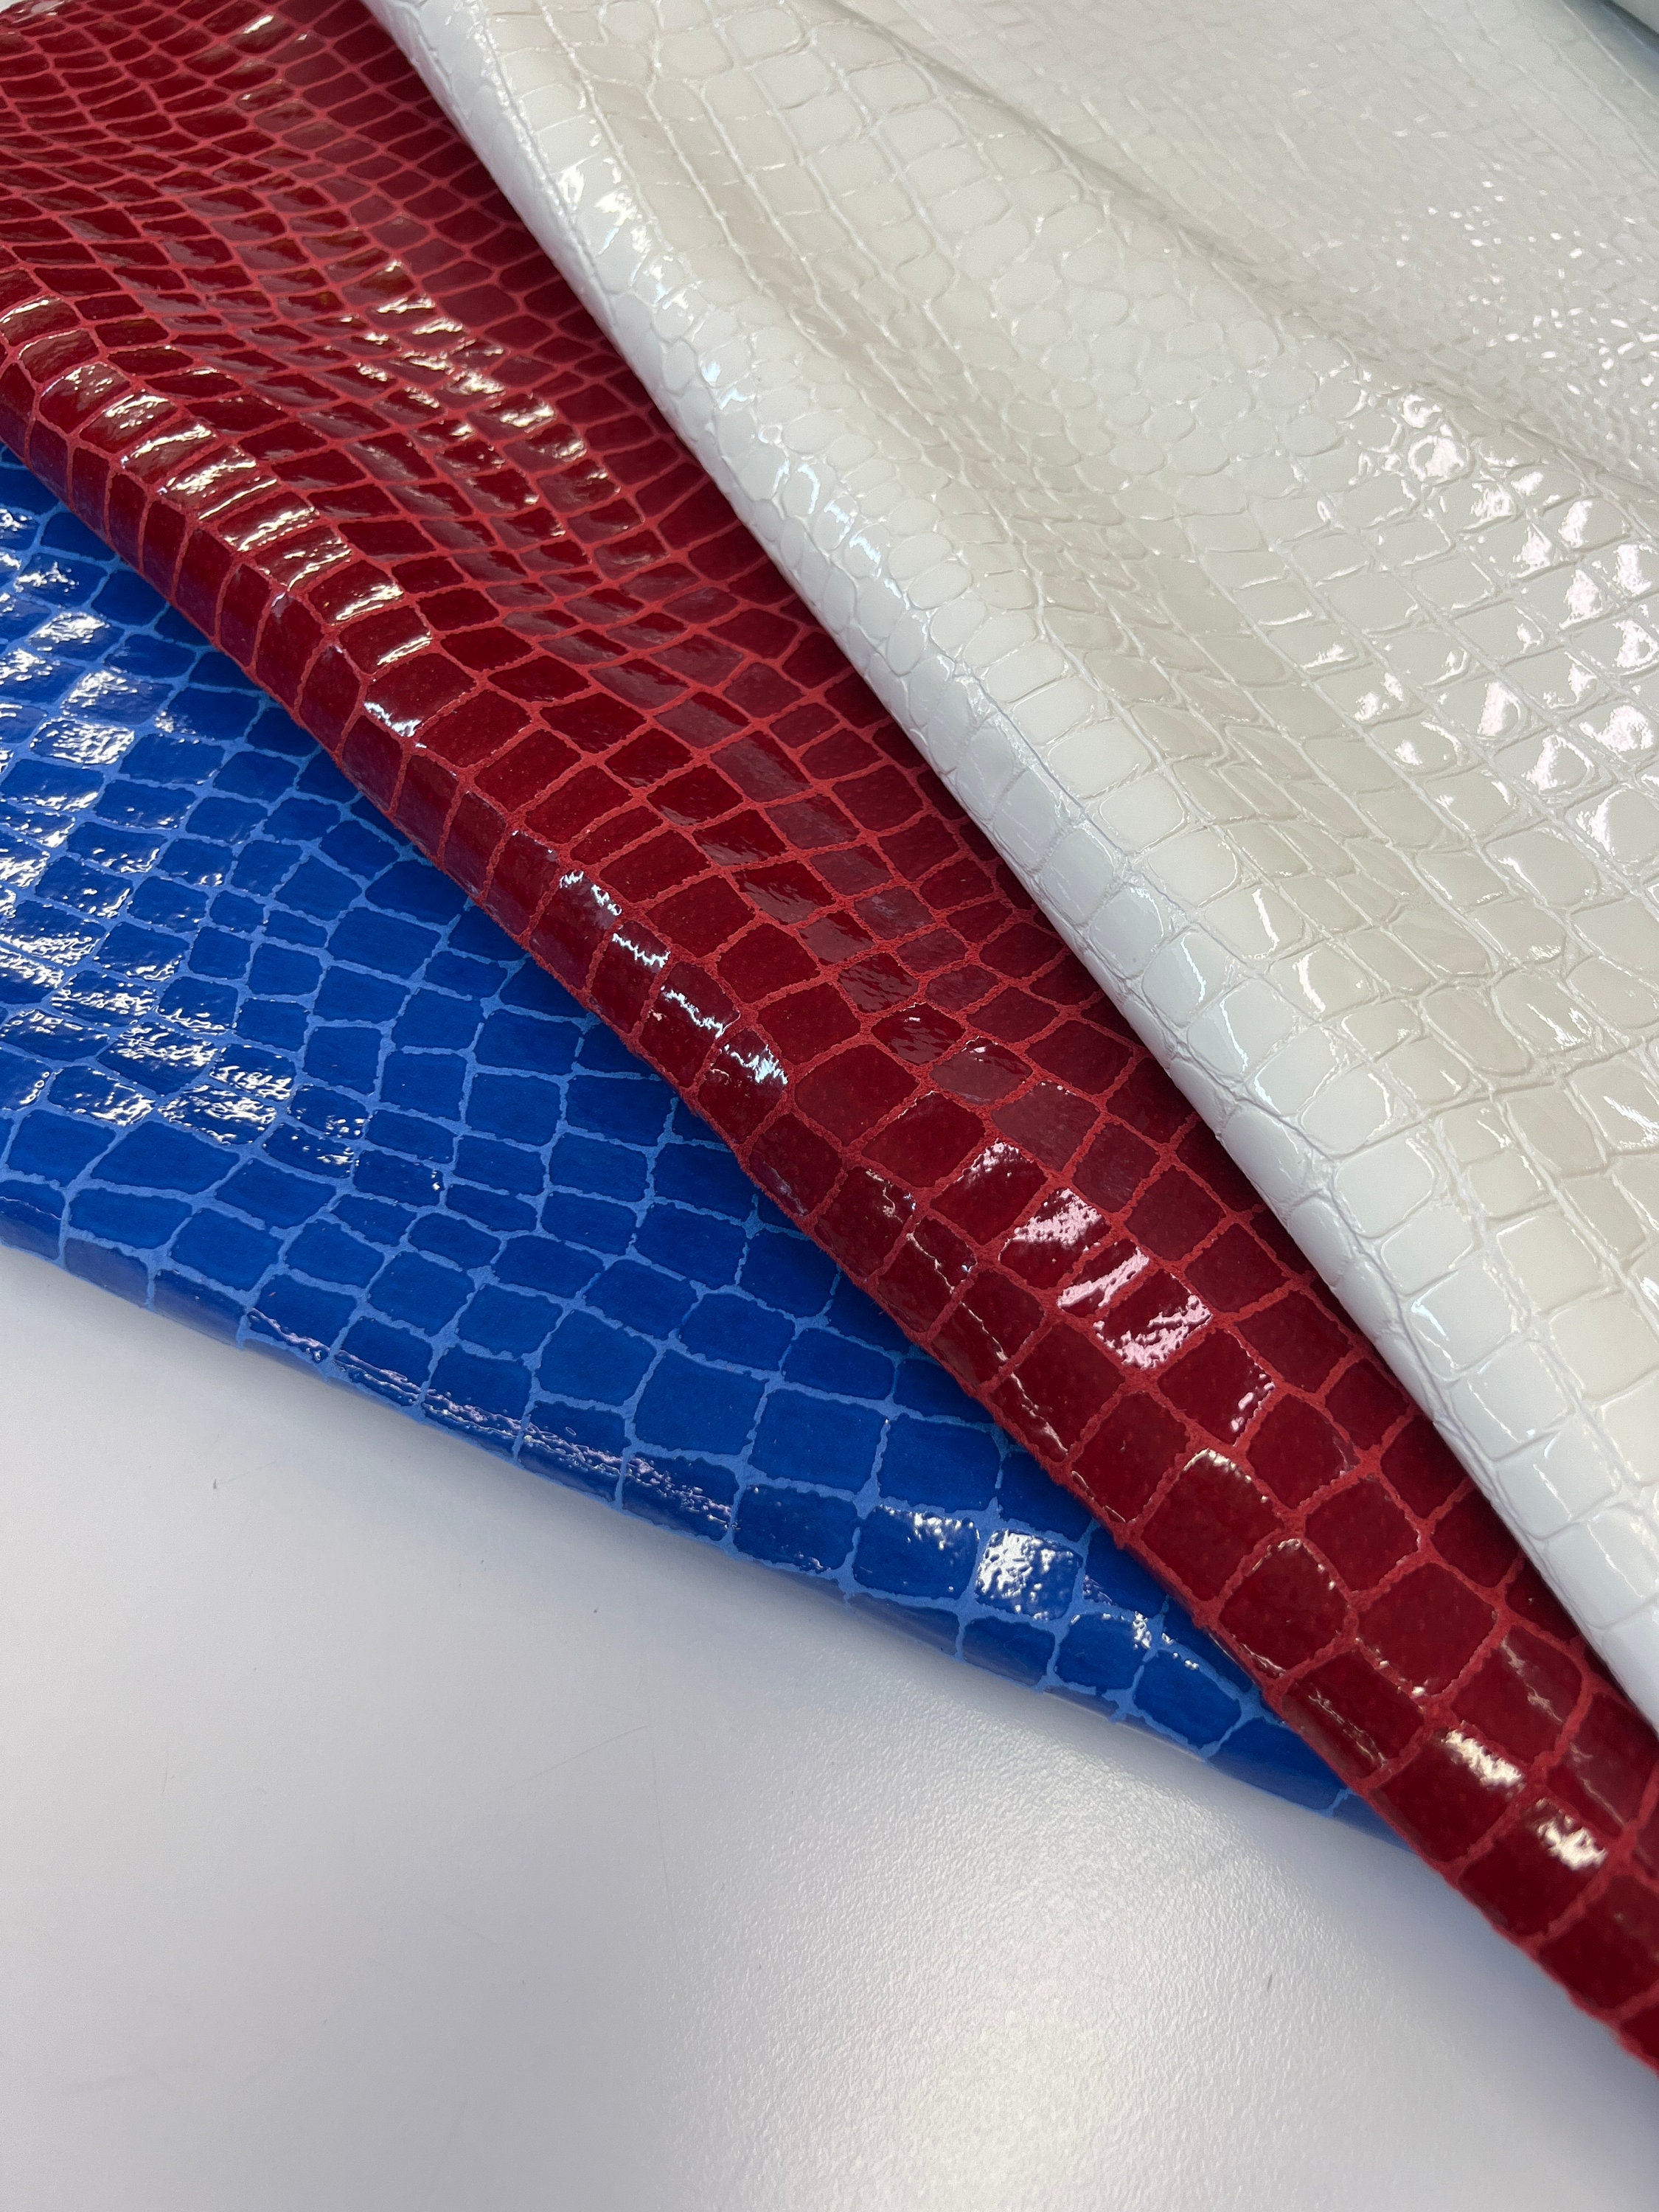  Synthetic Leather Crocodile Pattern Fabric 1.1mm